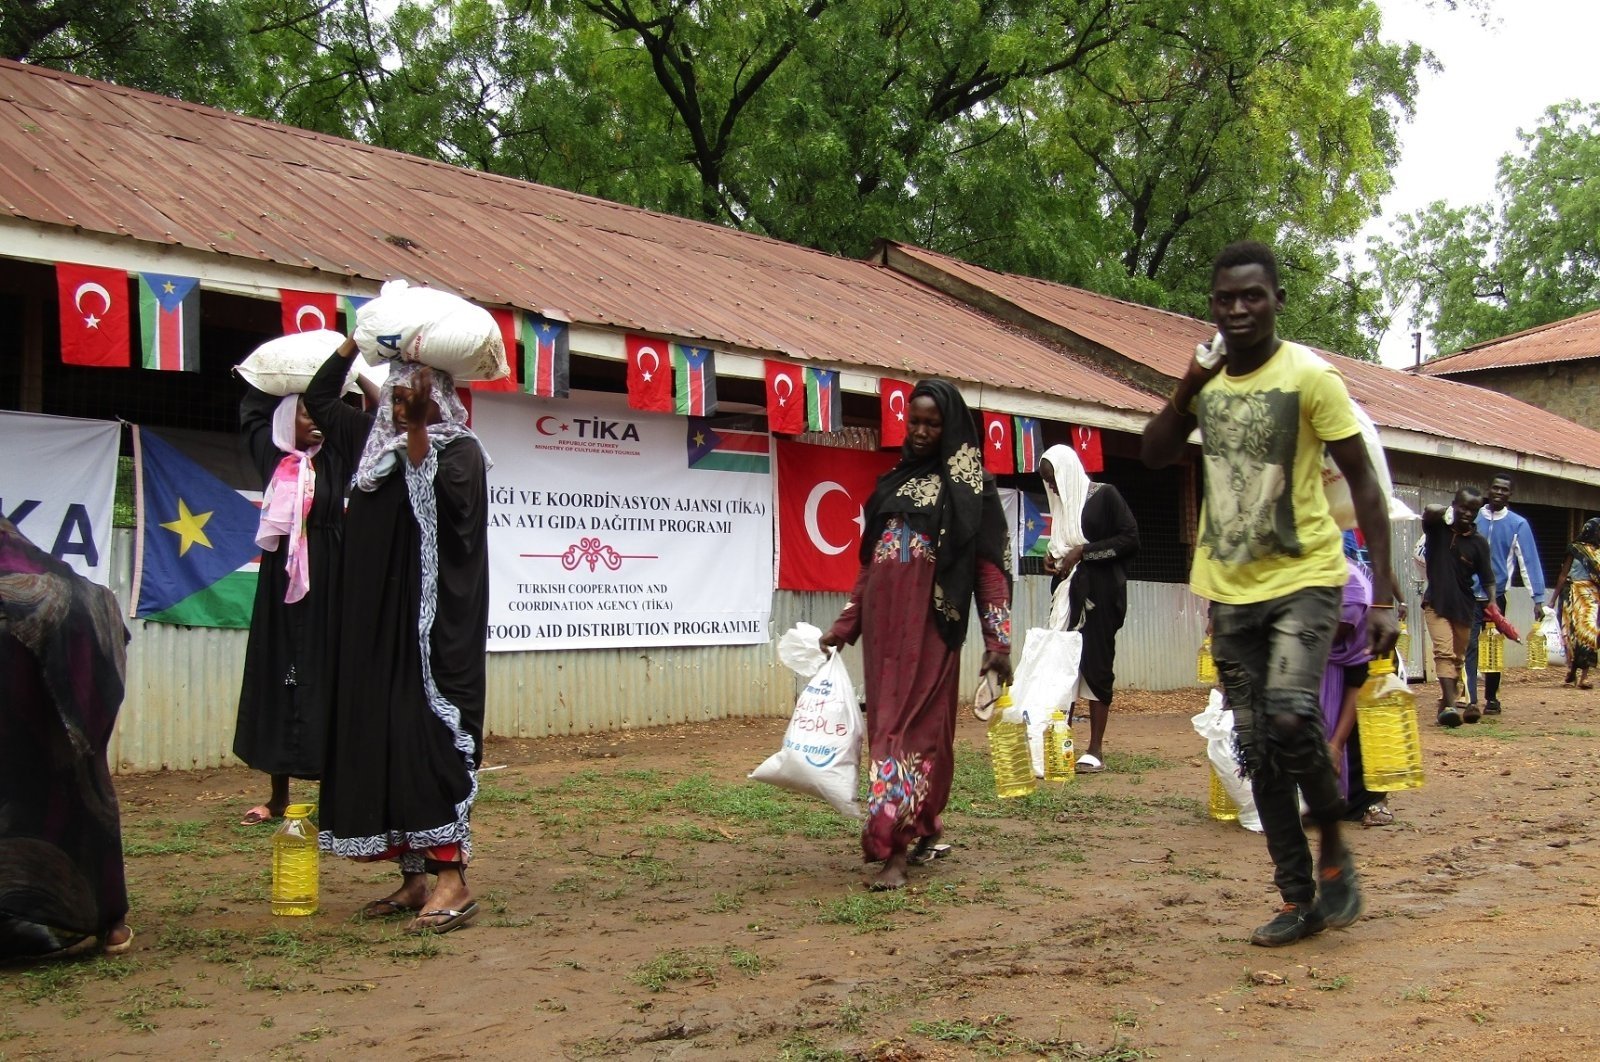 People carry food aid they received from the Turkish Cooperation and Coordination Agency, in Juba, South Sudan, April 26, 2022. (AA File Photo)